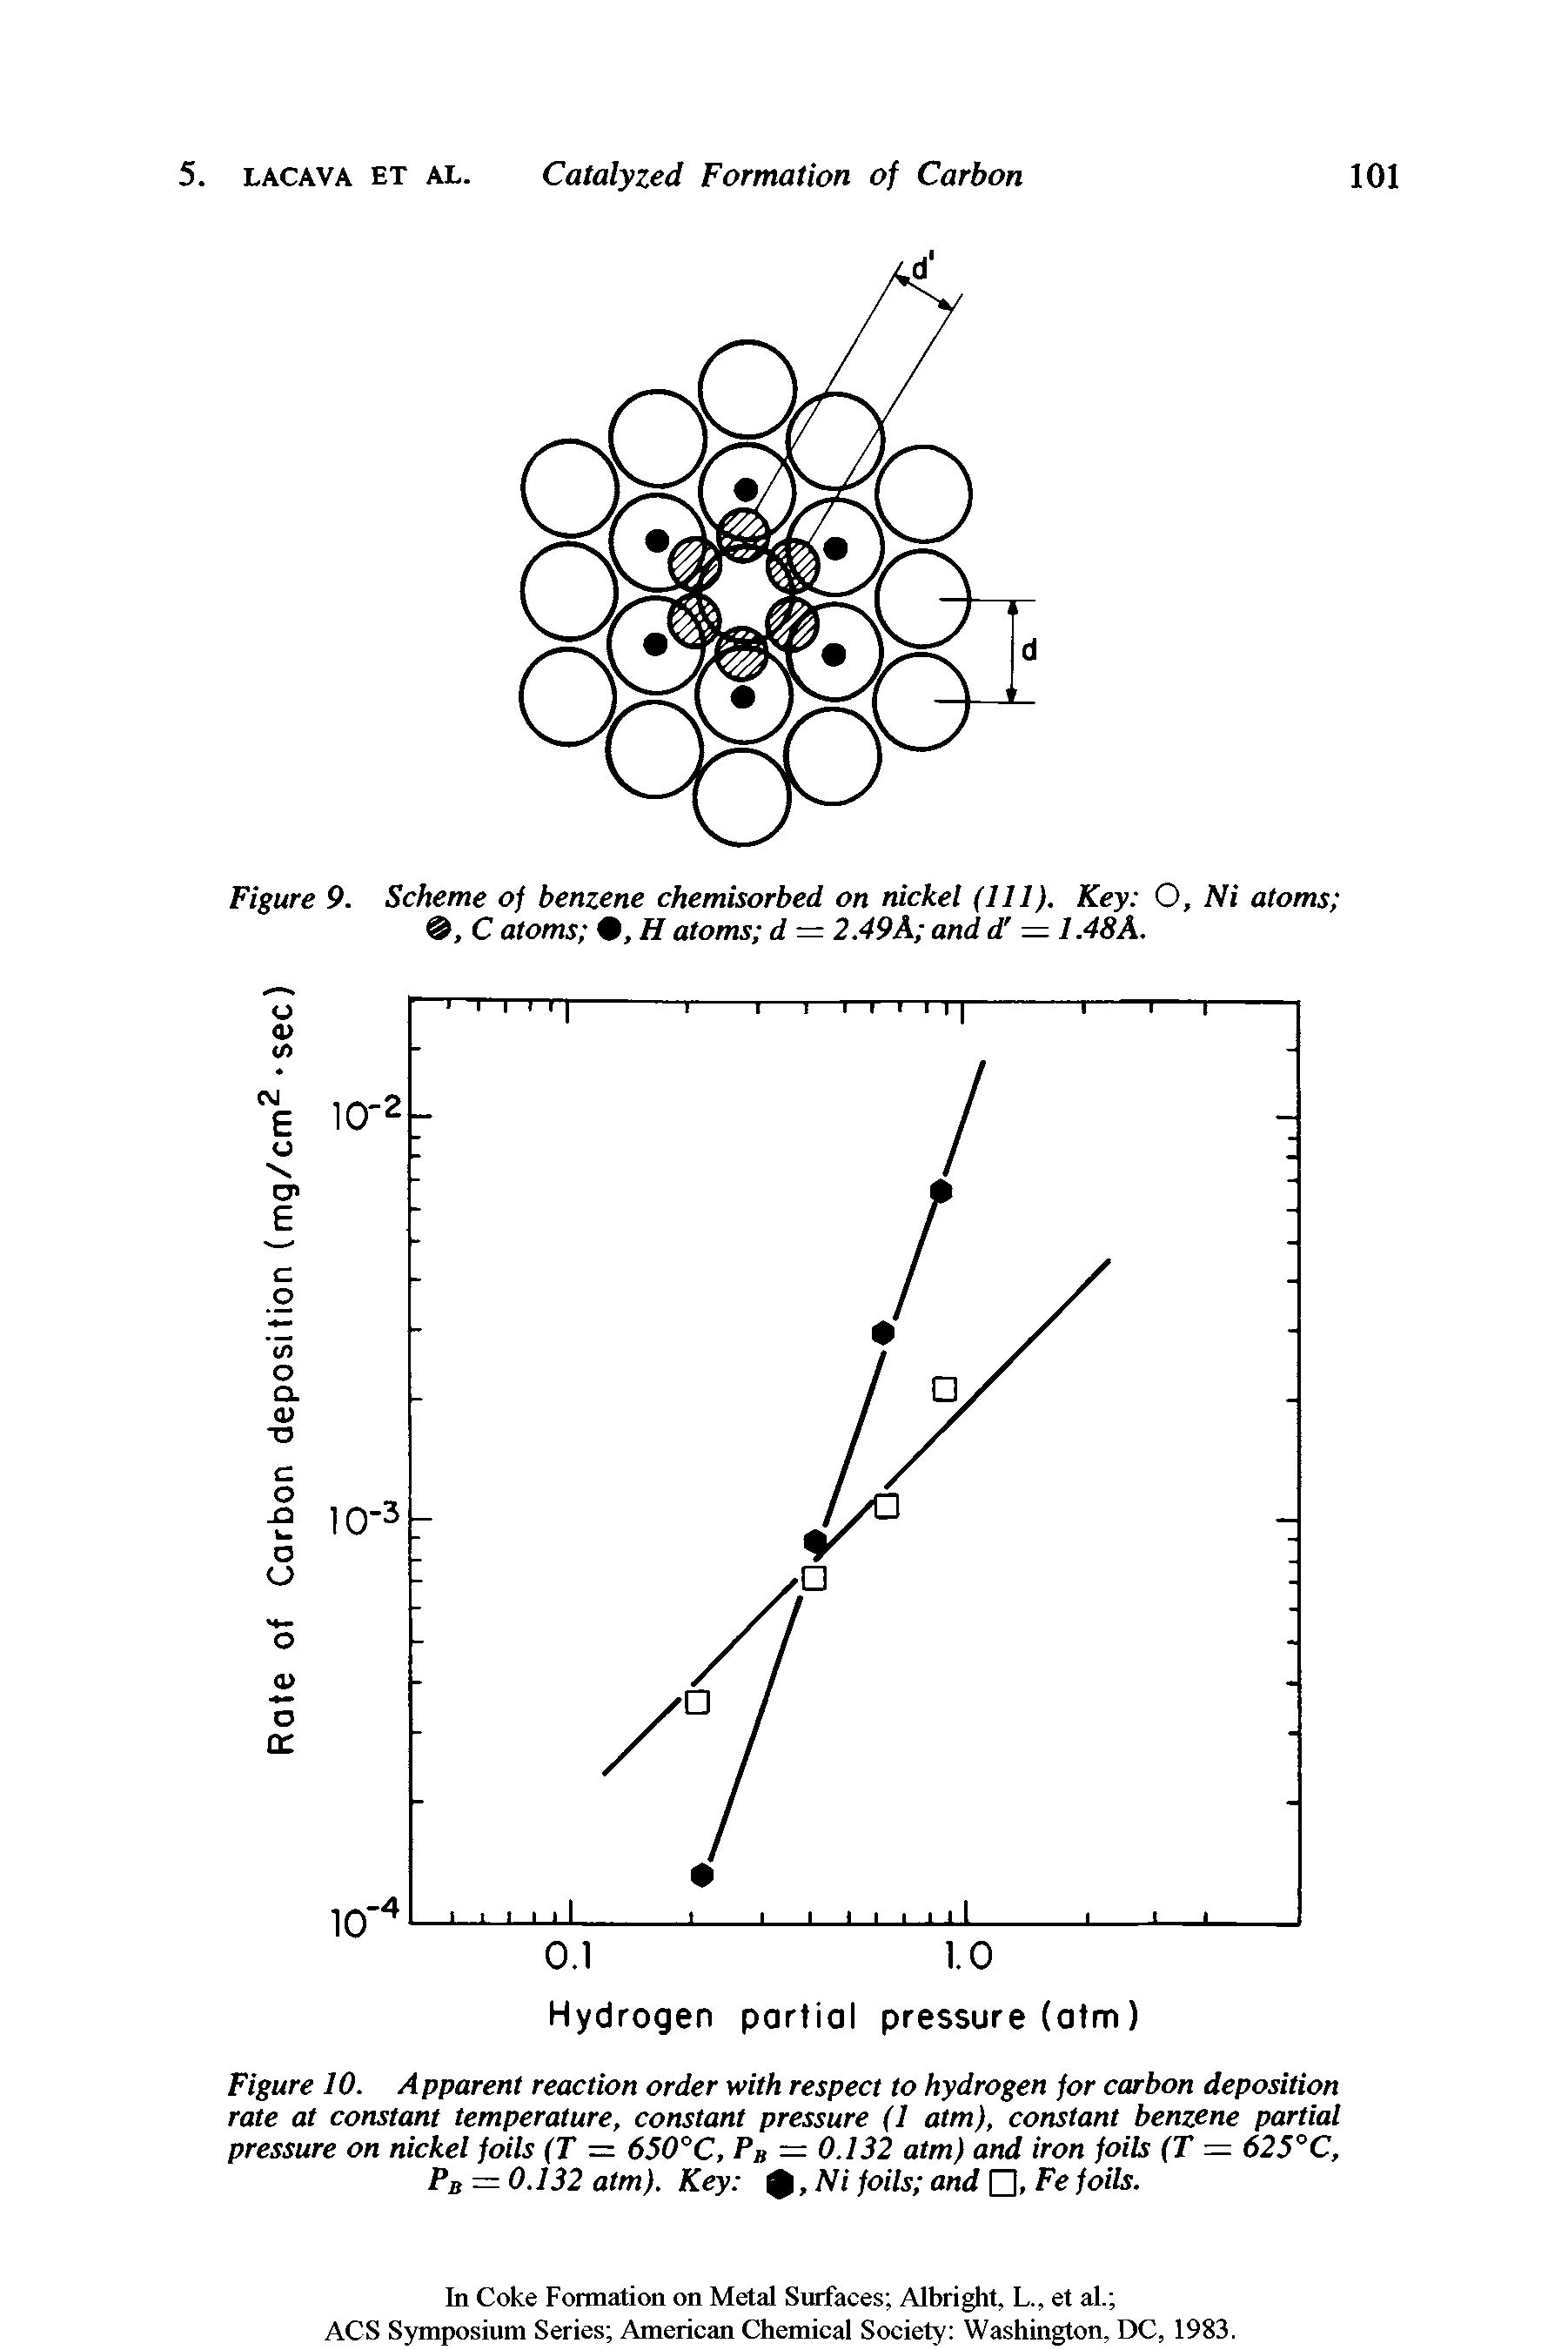 Figure 10. Apparent reaction order with respect to hydrogen for carbon deposition rate at constant temperature, constant pressure (1 atm), constant benzene partial pressure on nickel foils (T = 650°C, P = 0.132 atm) and iron foils (T = 625°C, PB = 0.132 atm). Key , Ni foils and , Fe foils.